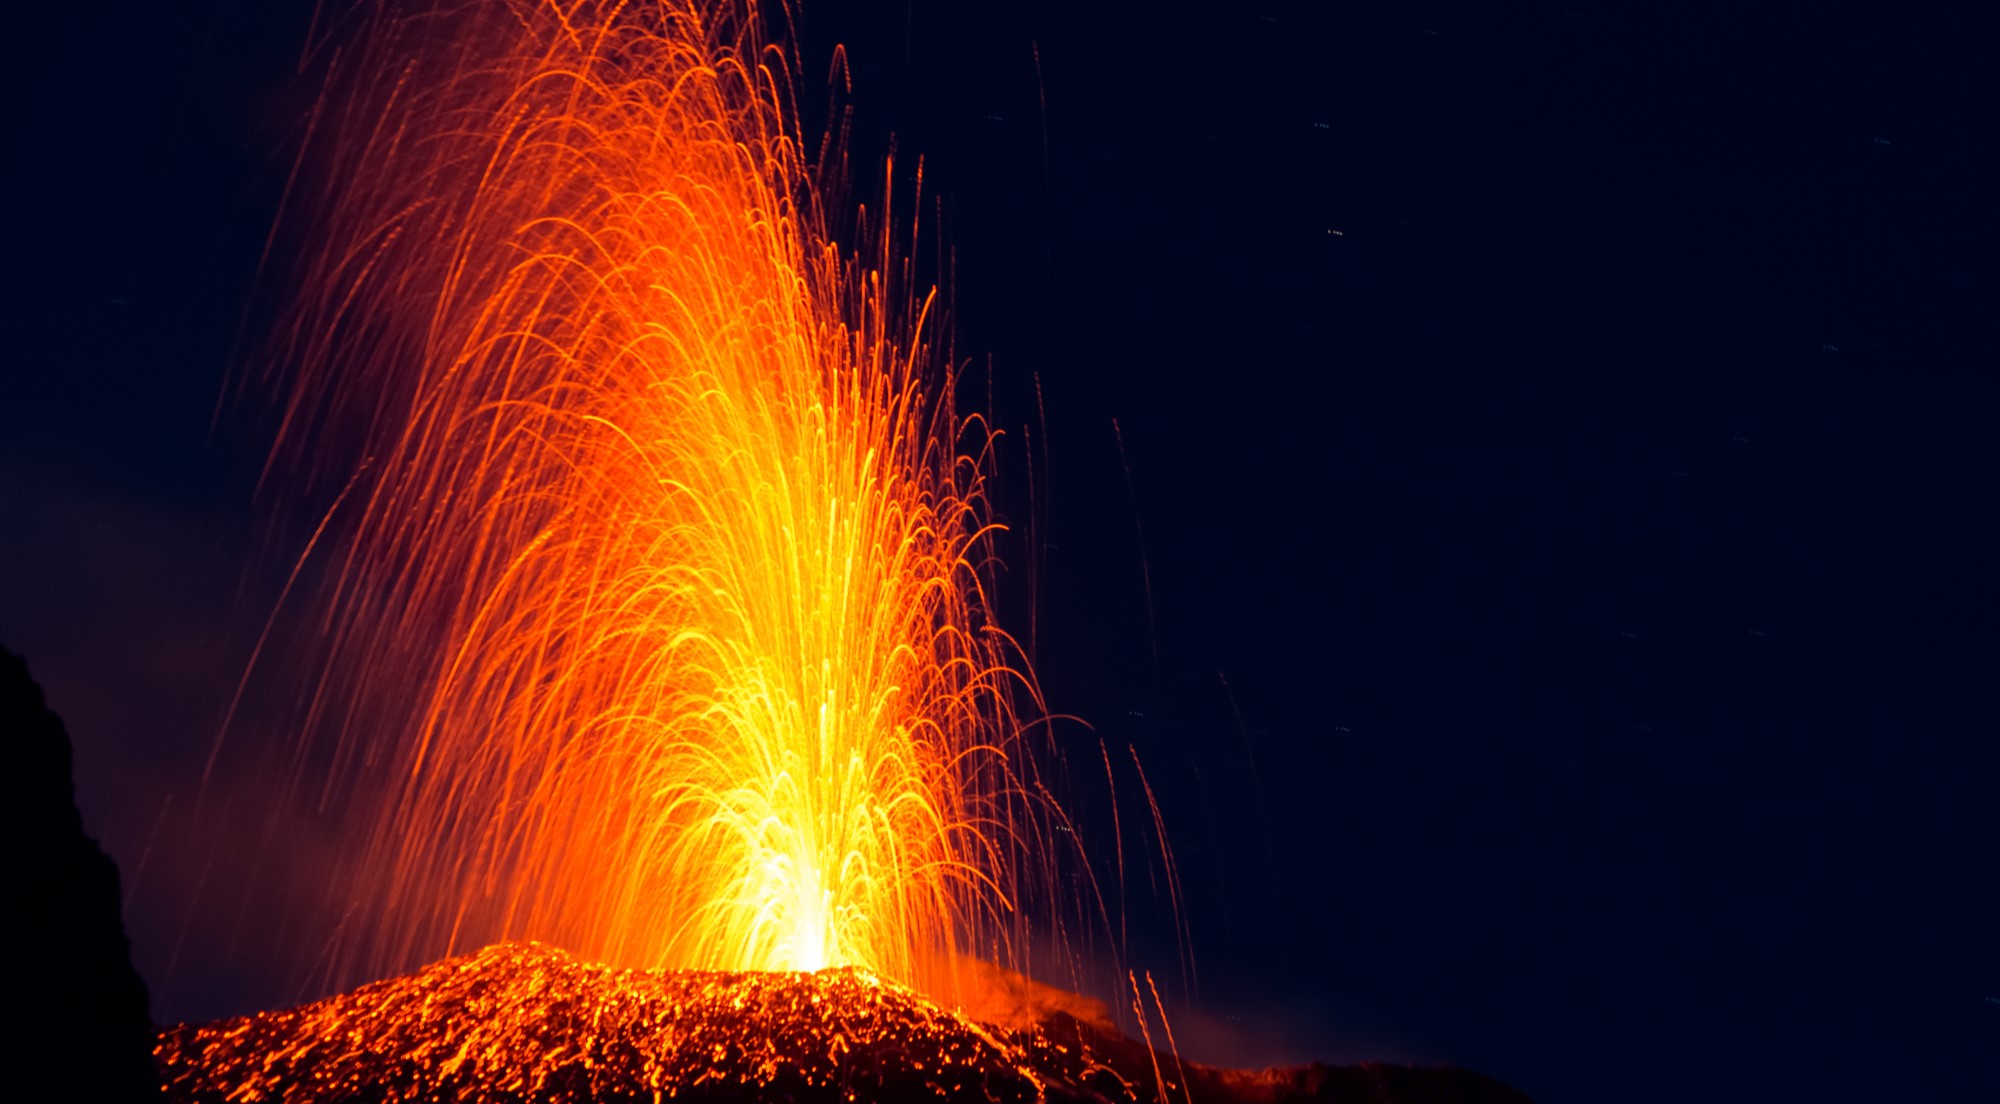 Volcanic eruptions naturally release carbon dioxide, though human activities contribute far more of the gas.